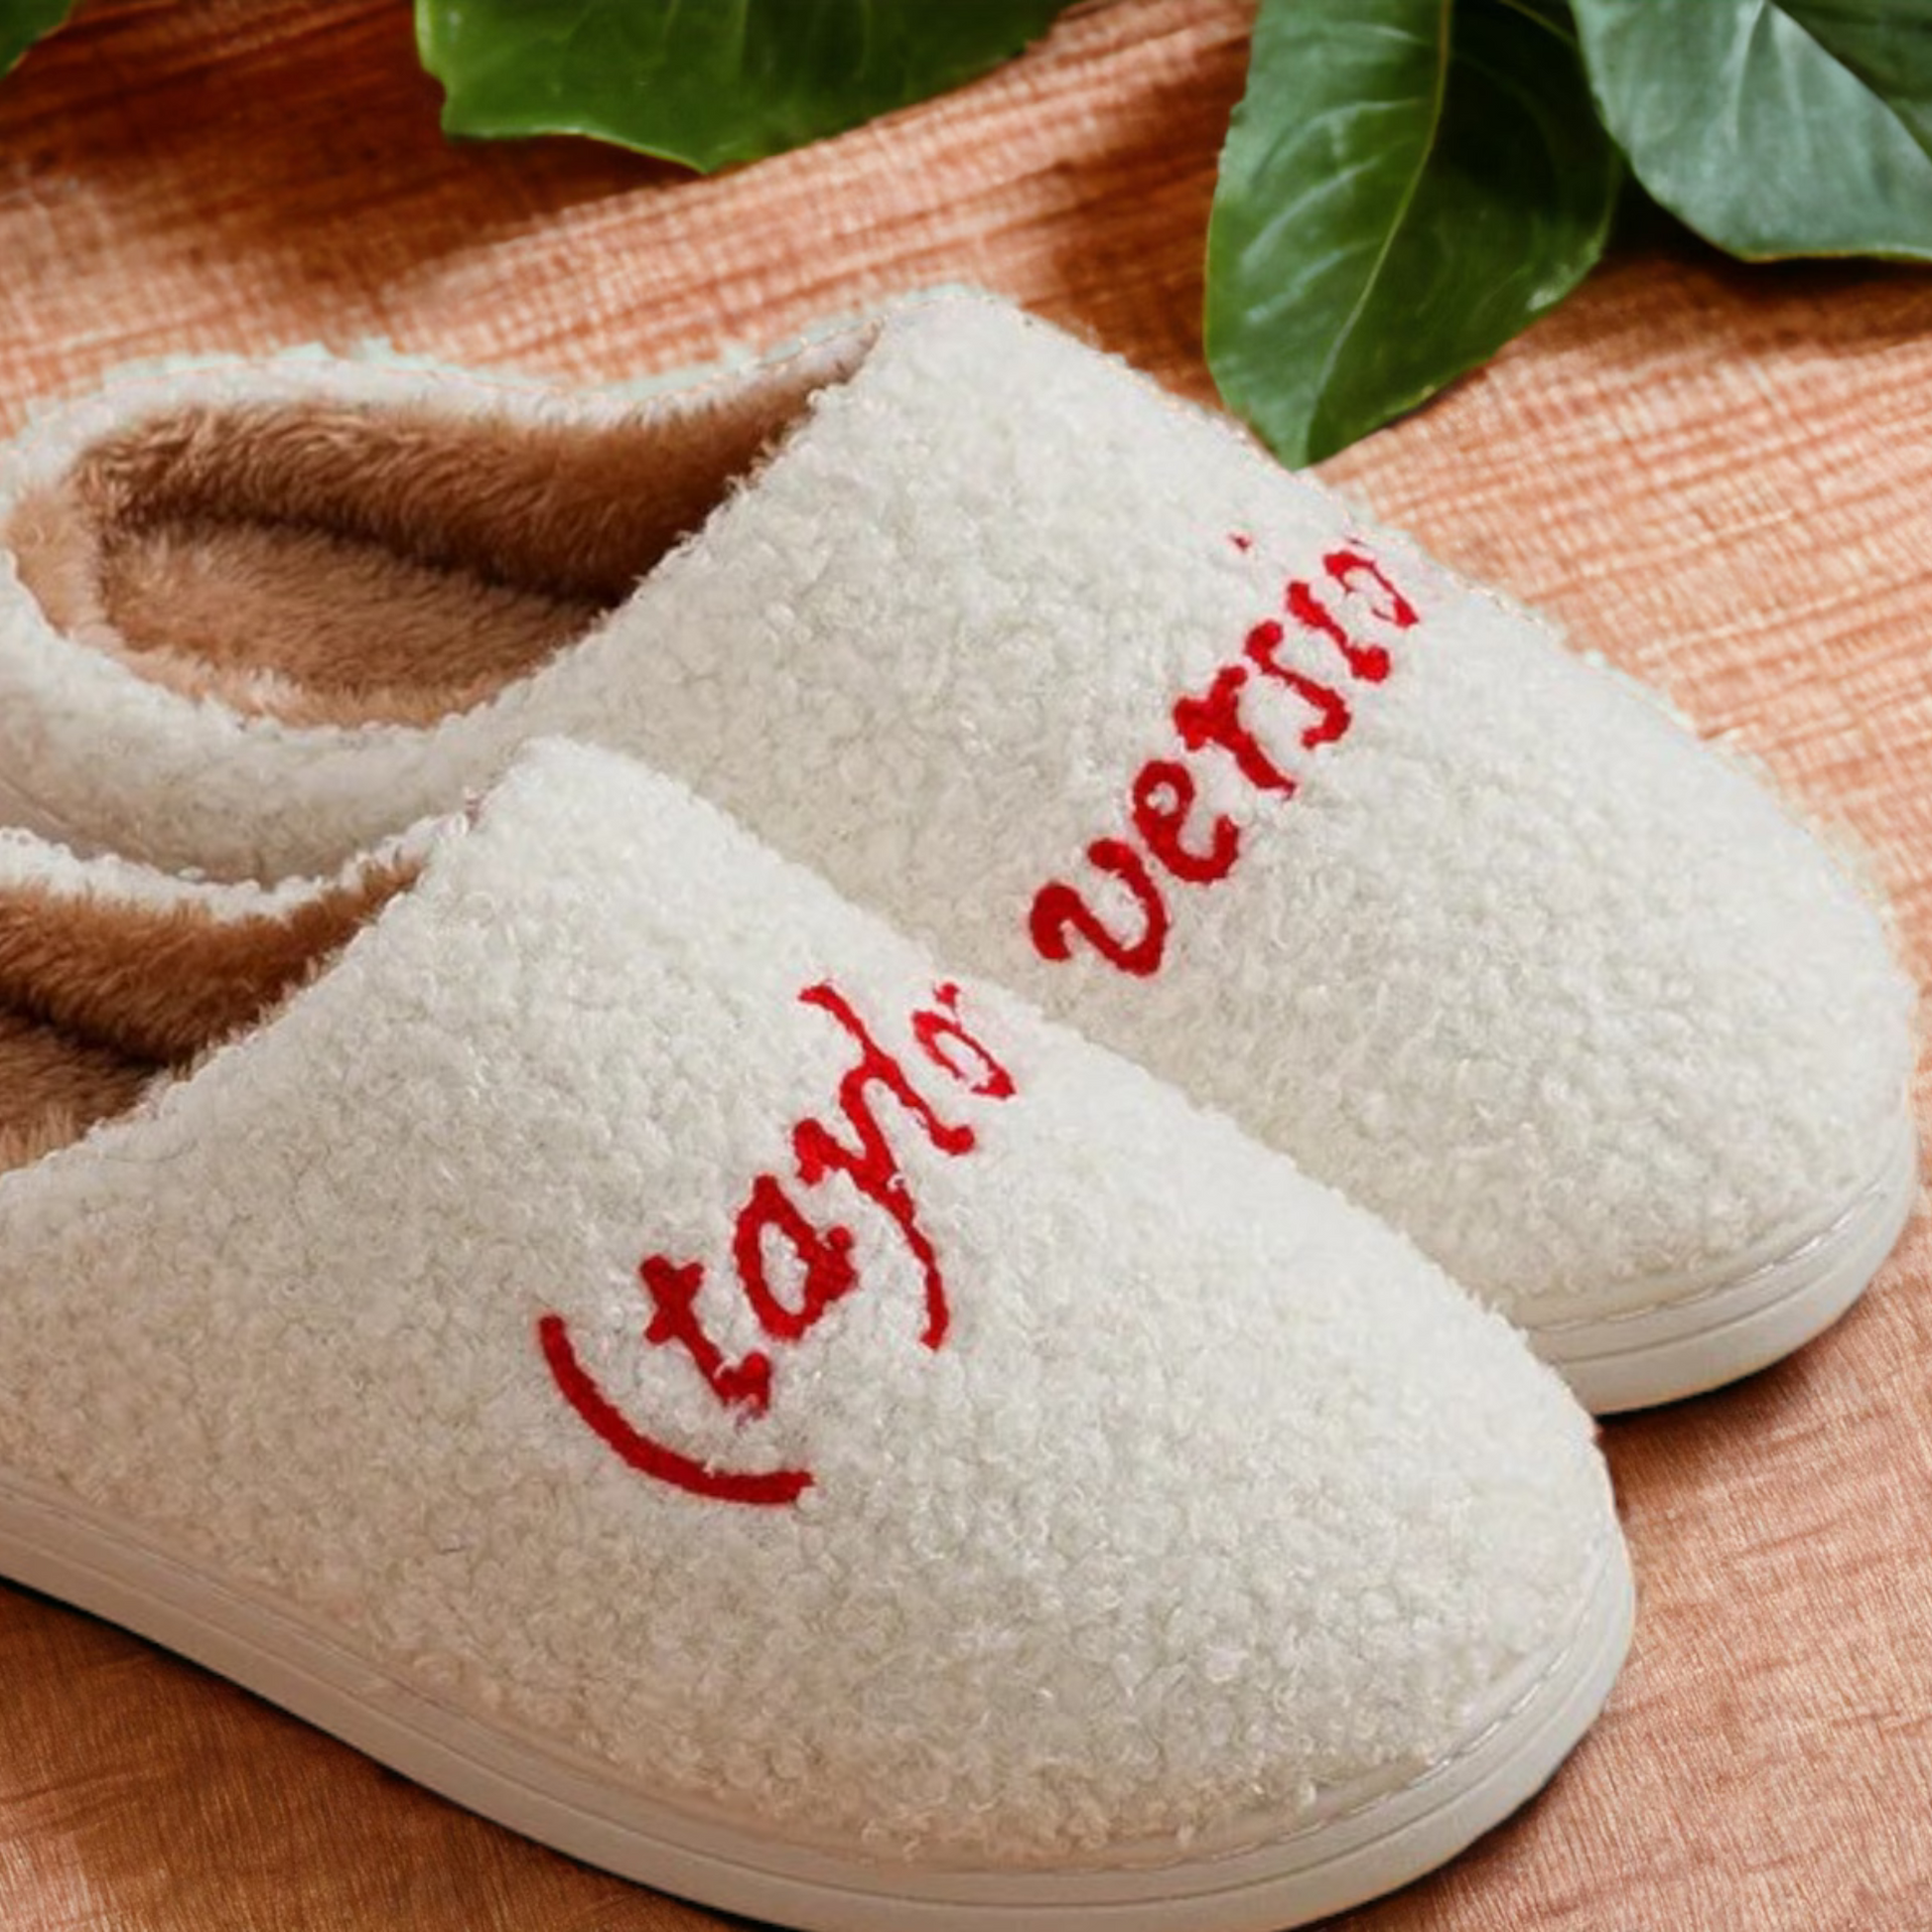 Taylors Version Slippers - Taylor Swift Slippers - Red